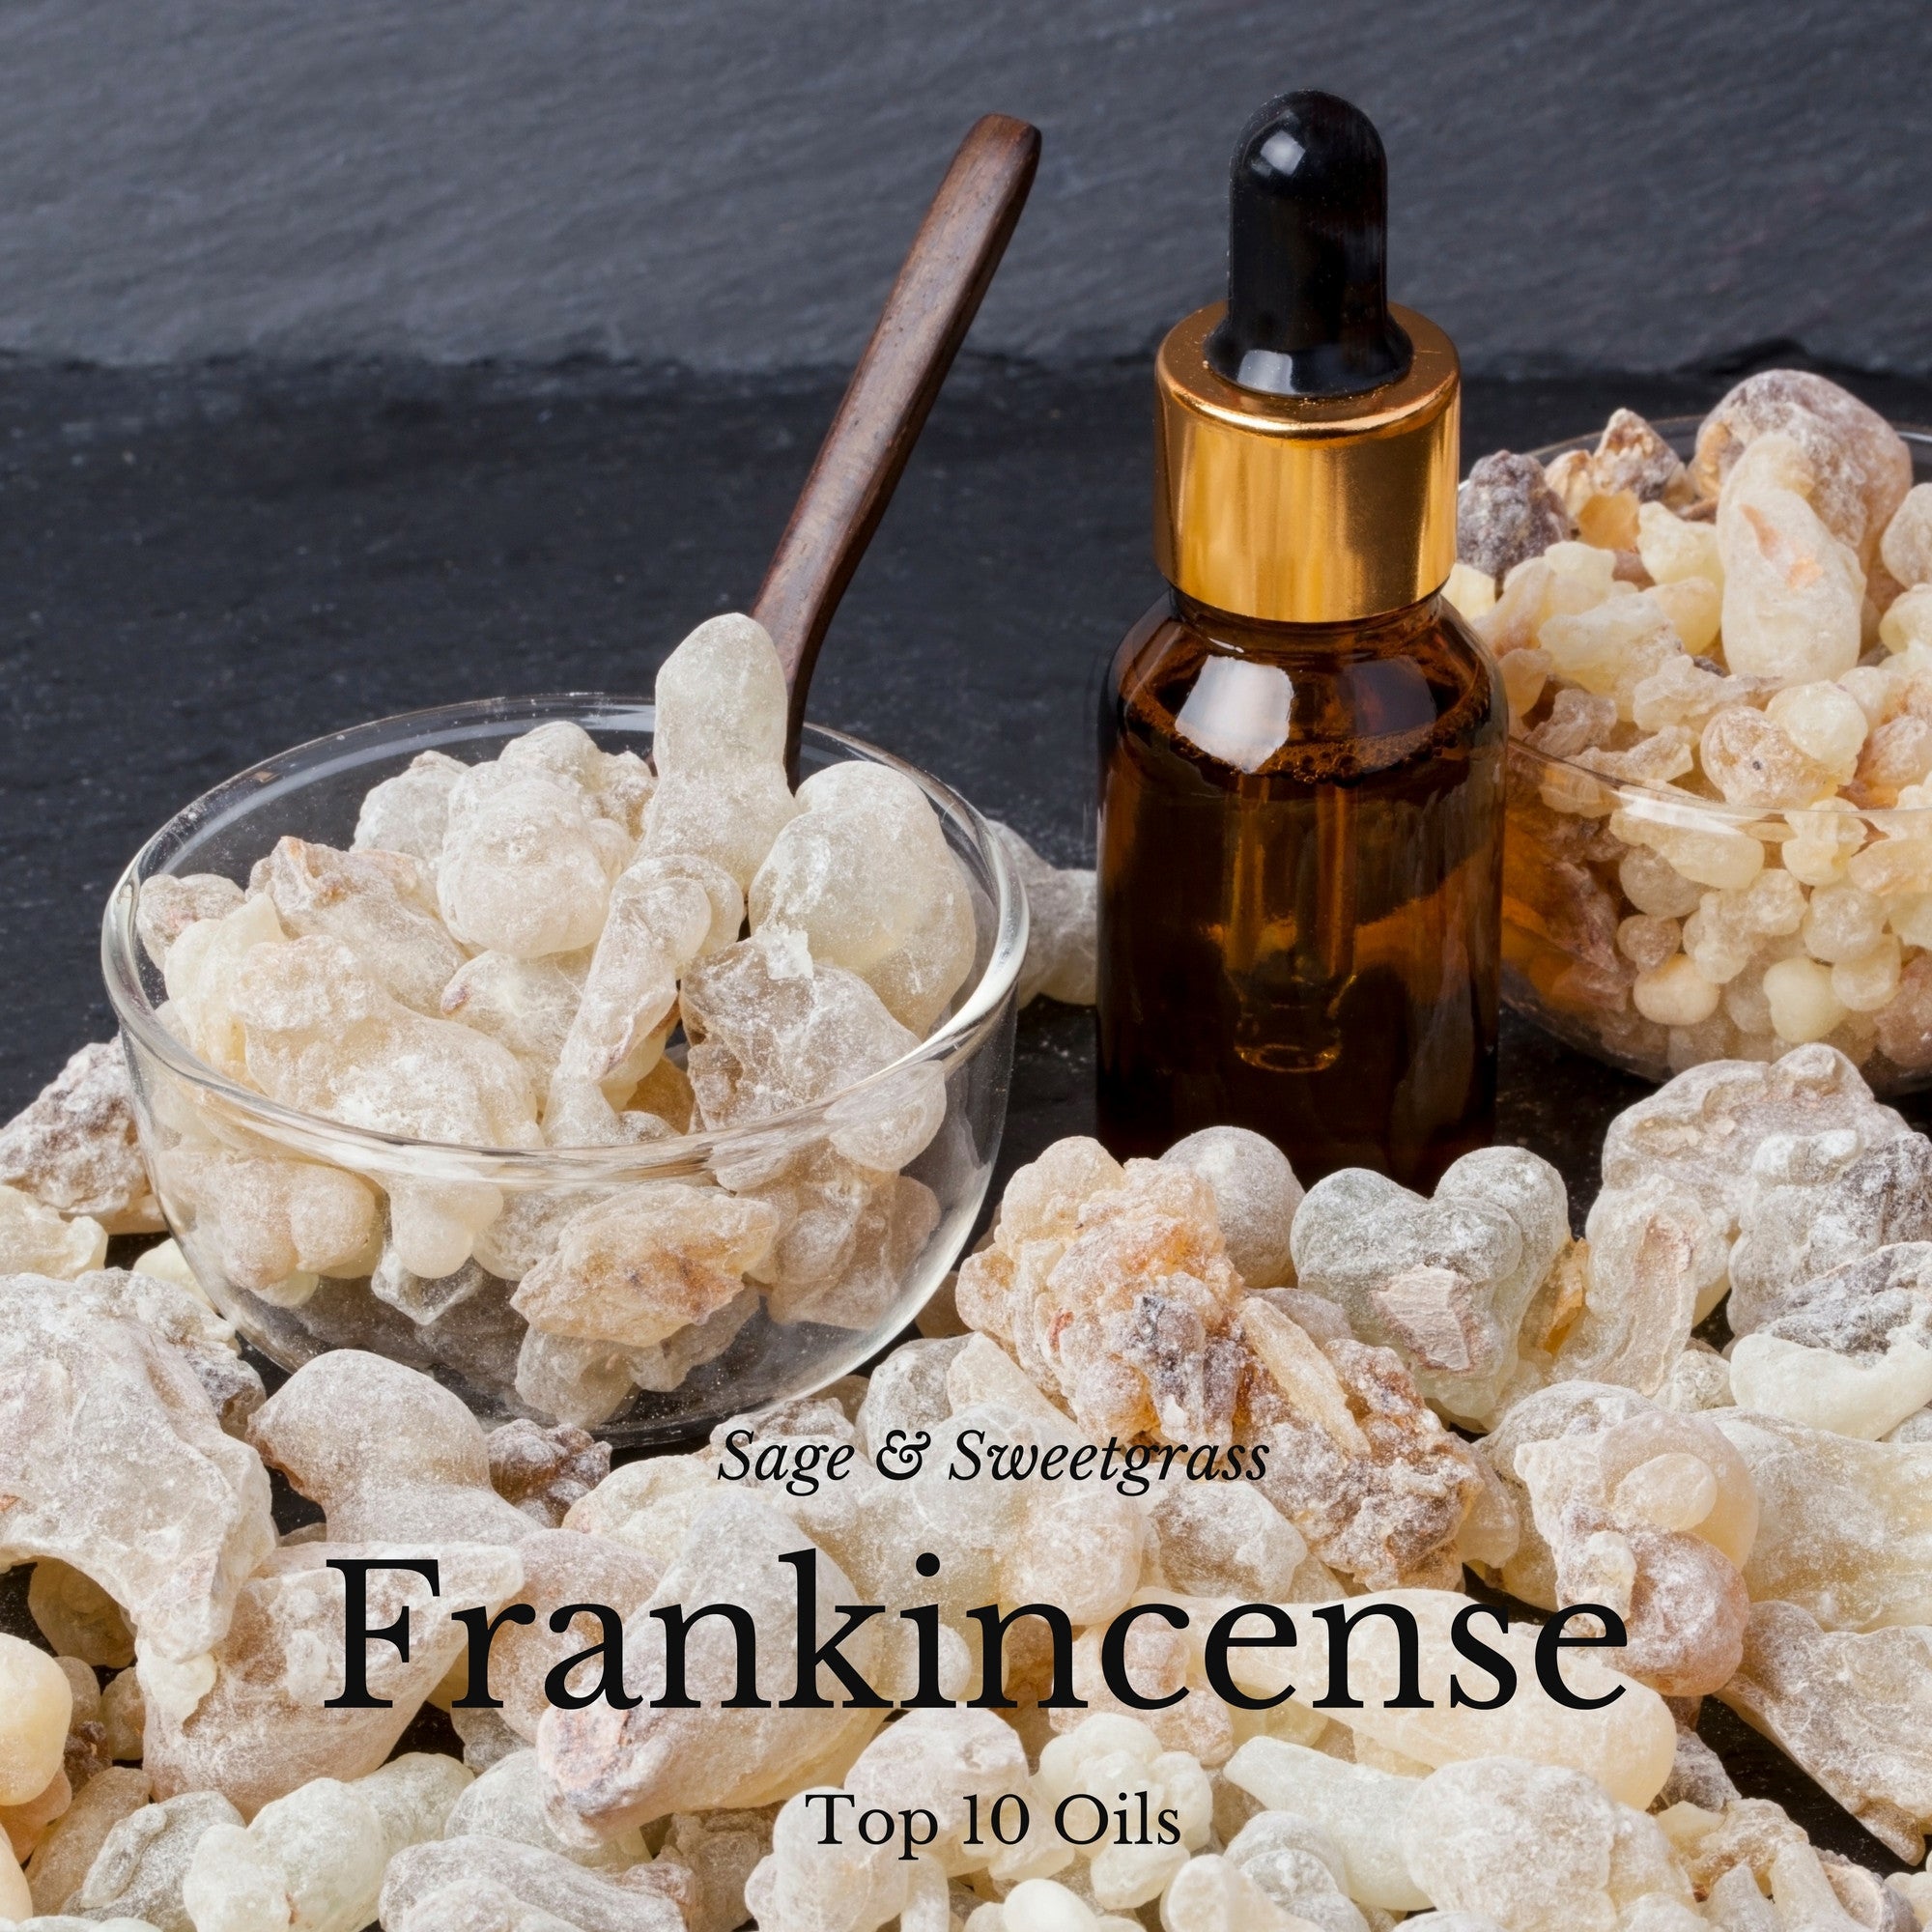 Frankincense, One of The Top 10 Anti Aging & Age Supporting Essential Oils